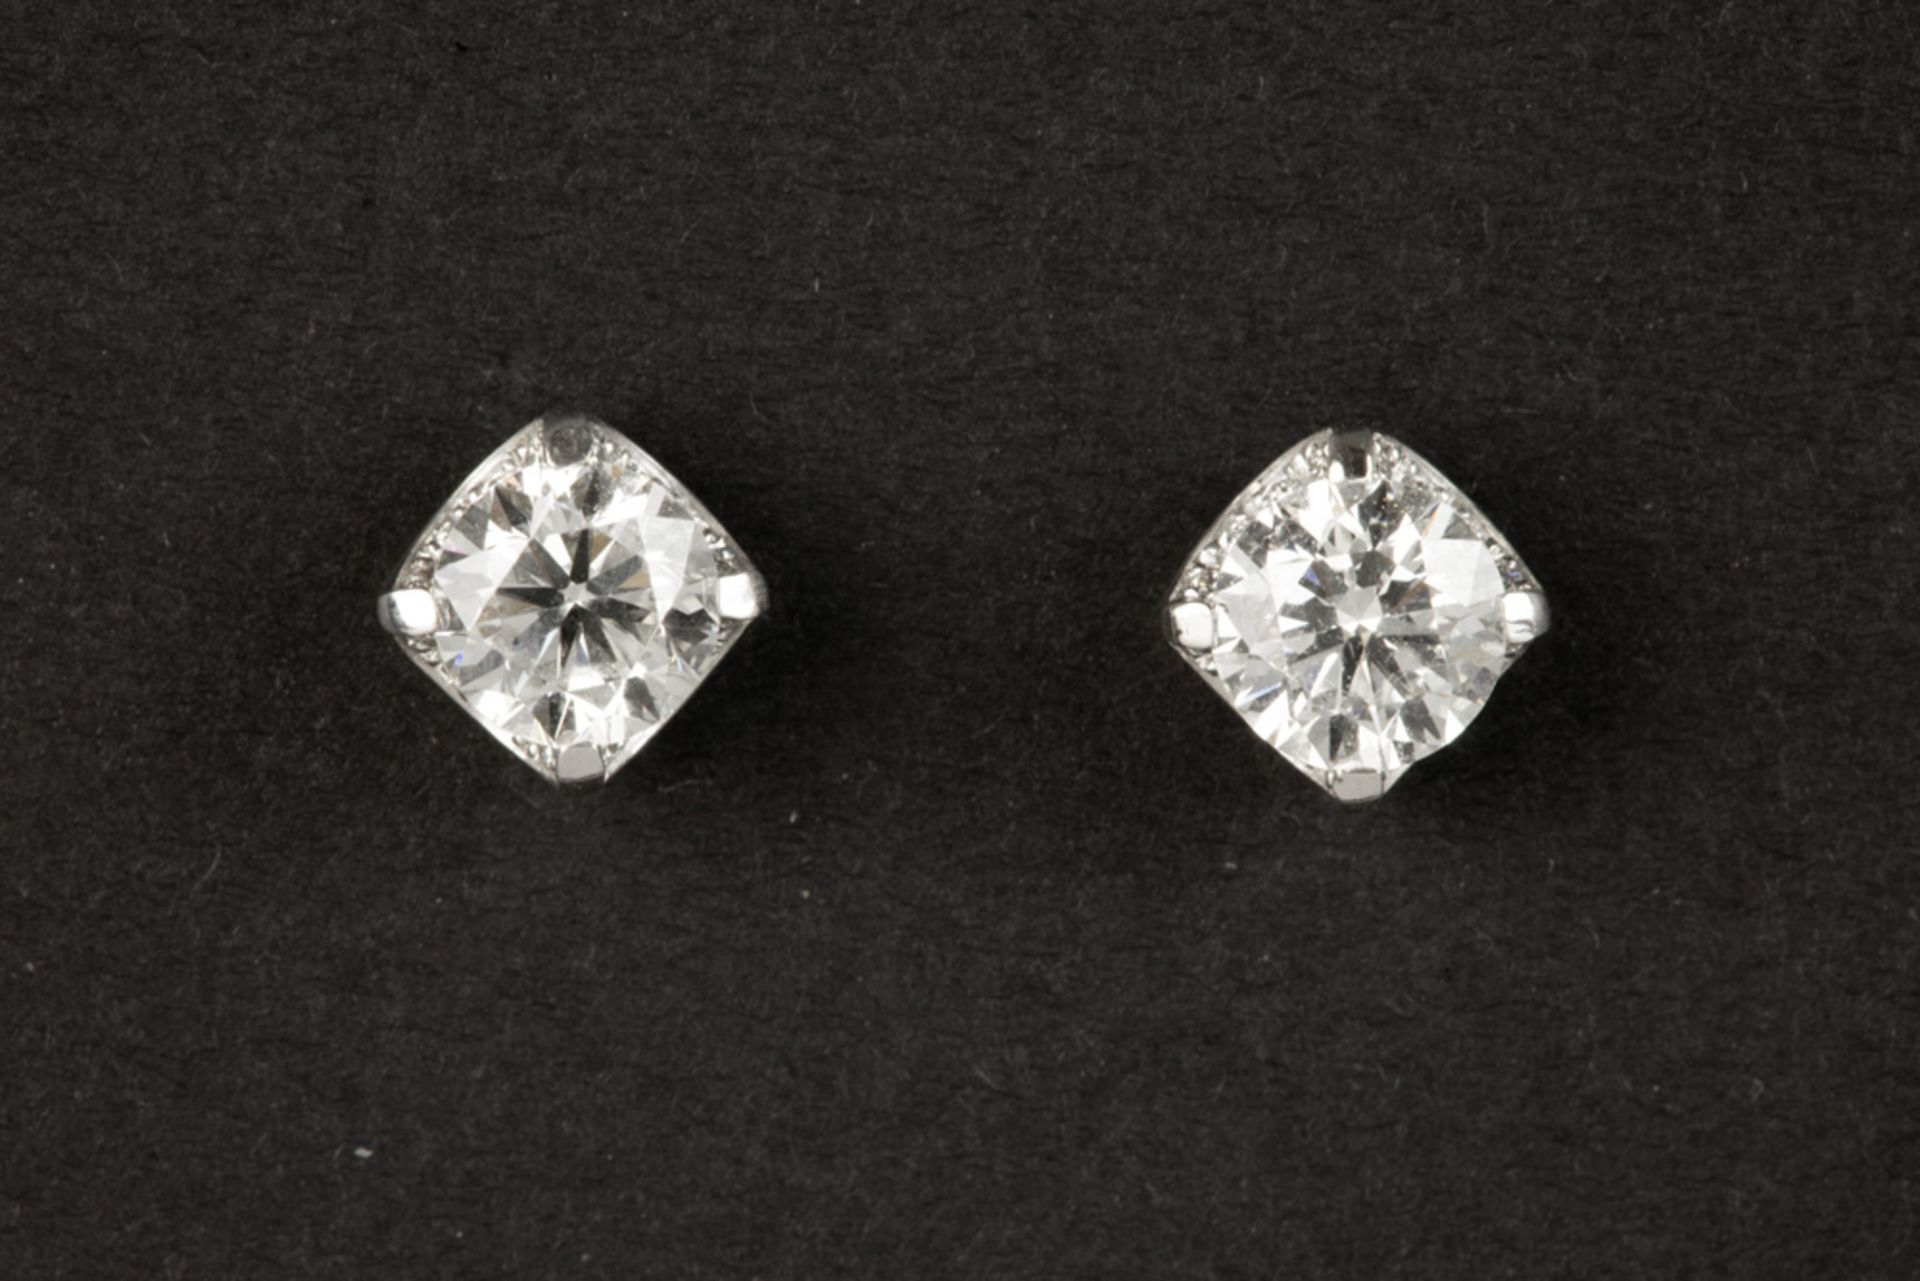 pair of in earrings in white gold (18 carat) each with a quality brilliant cut diamond, weighing 1,